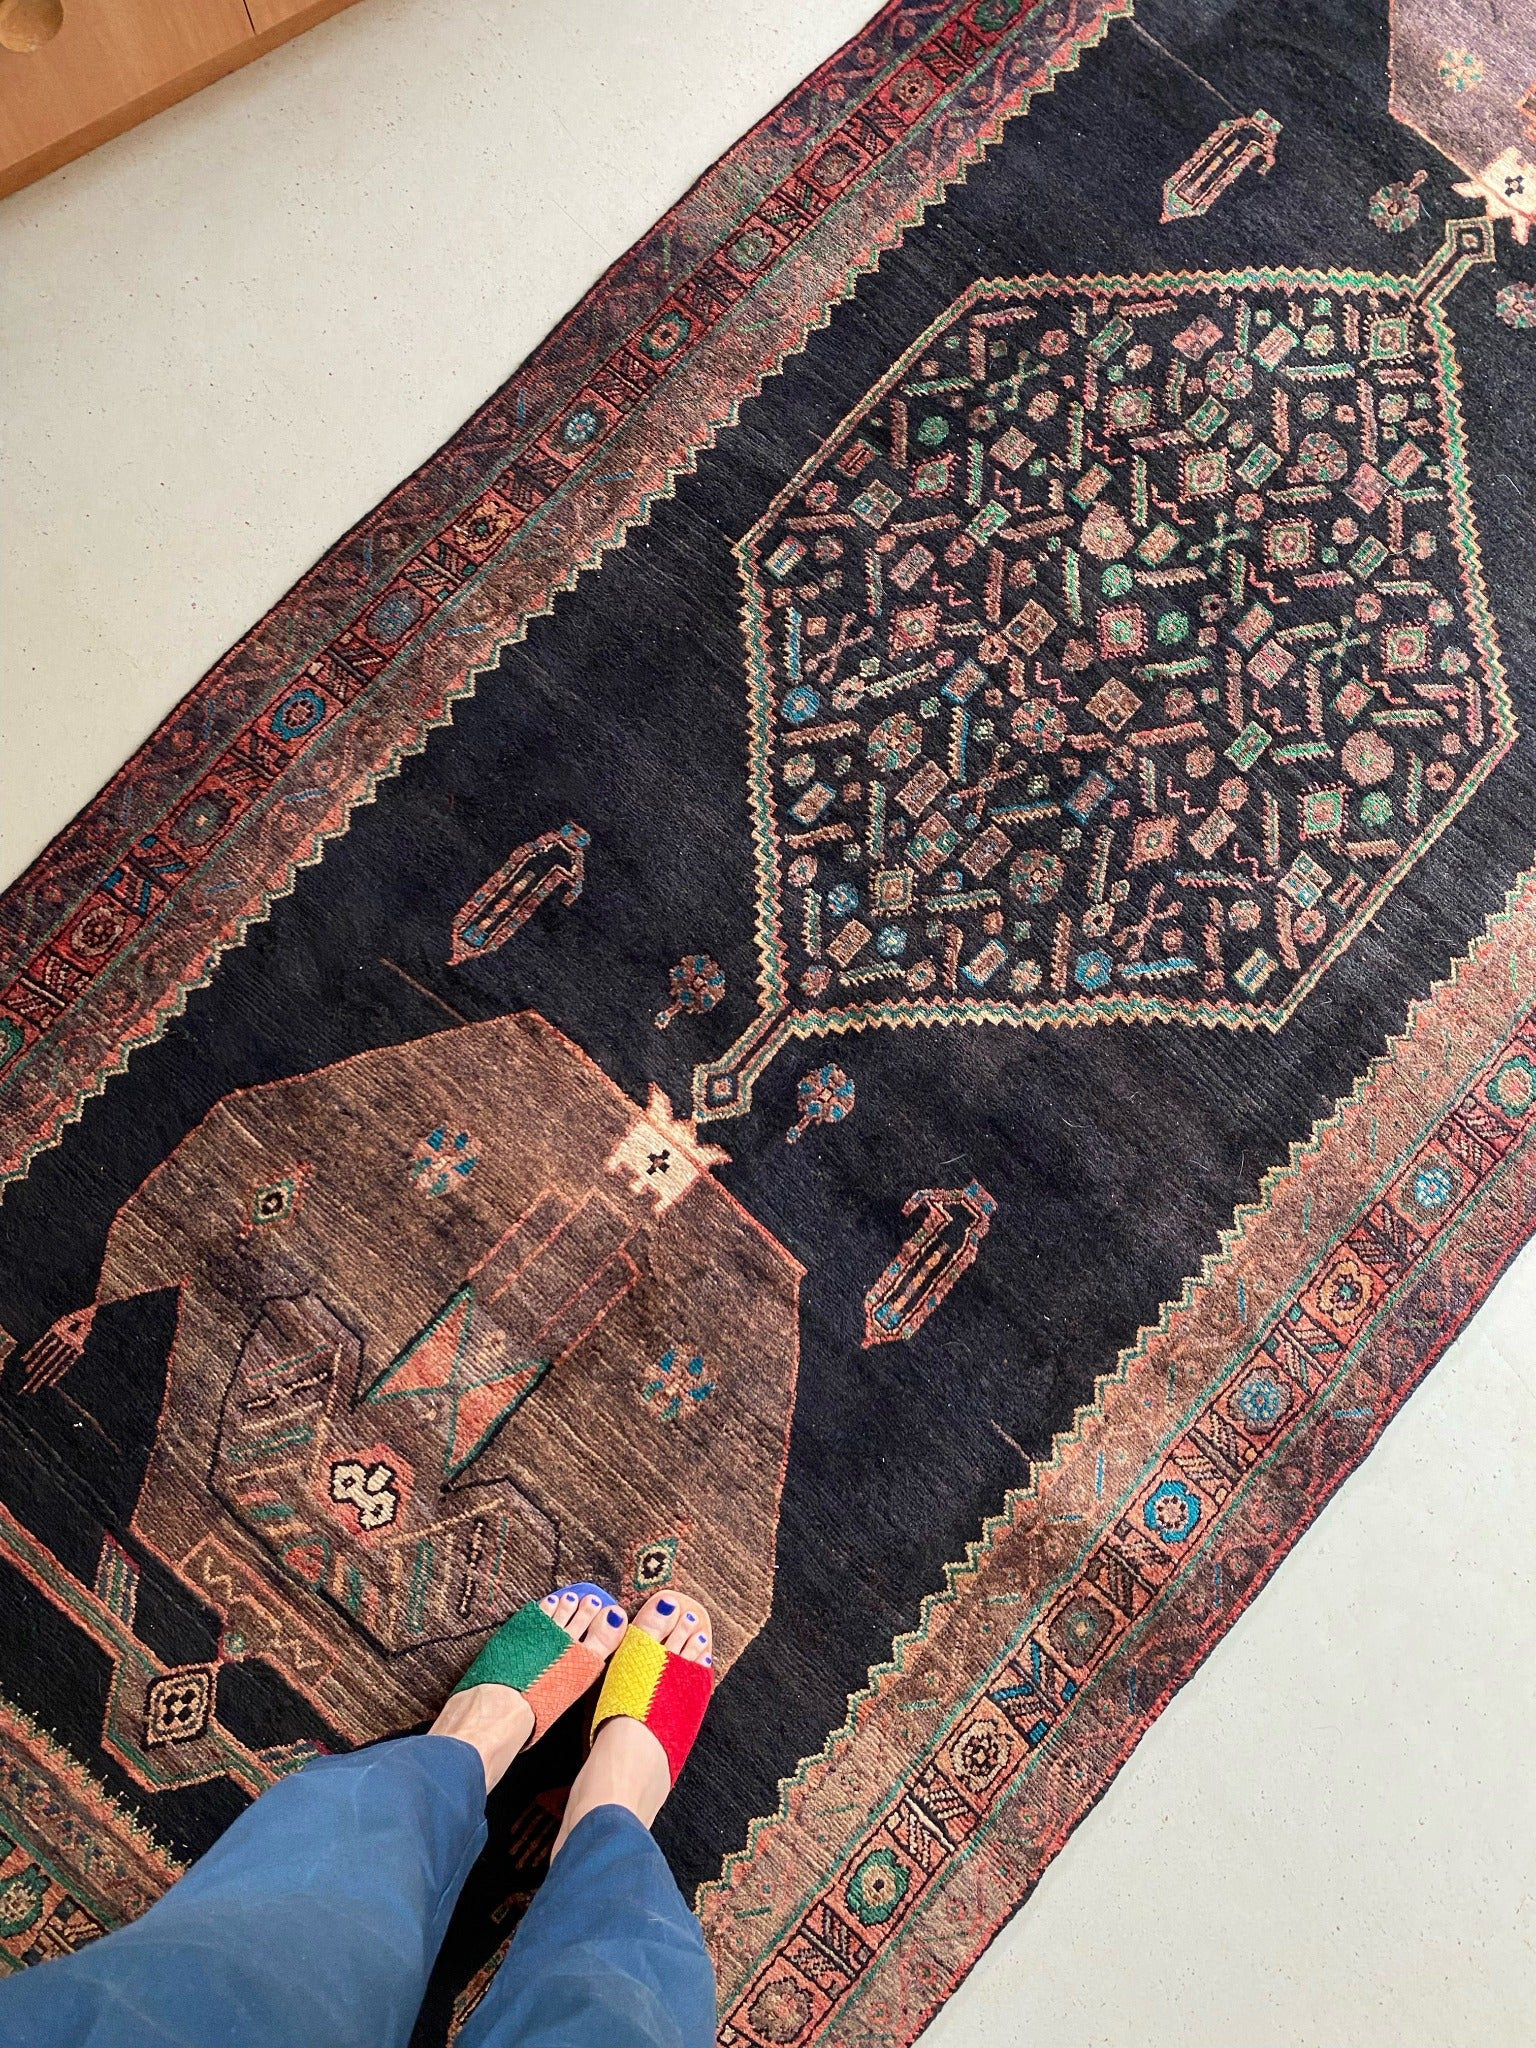 See Details of colorful runner rug